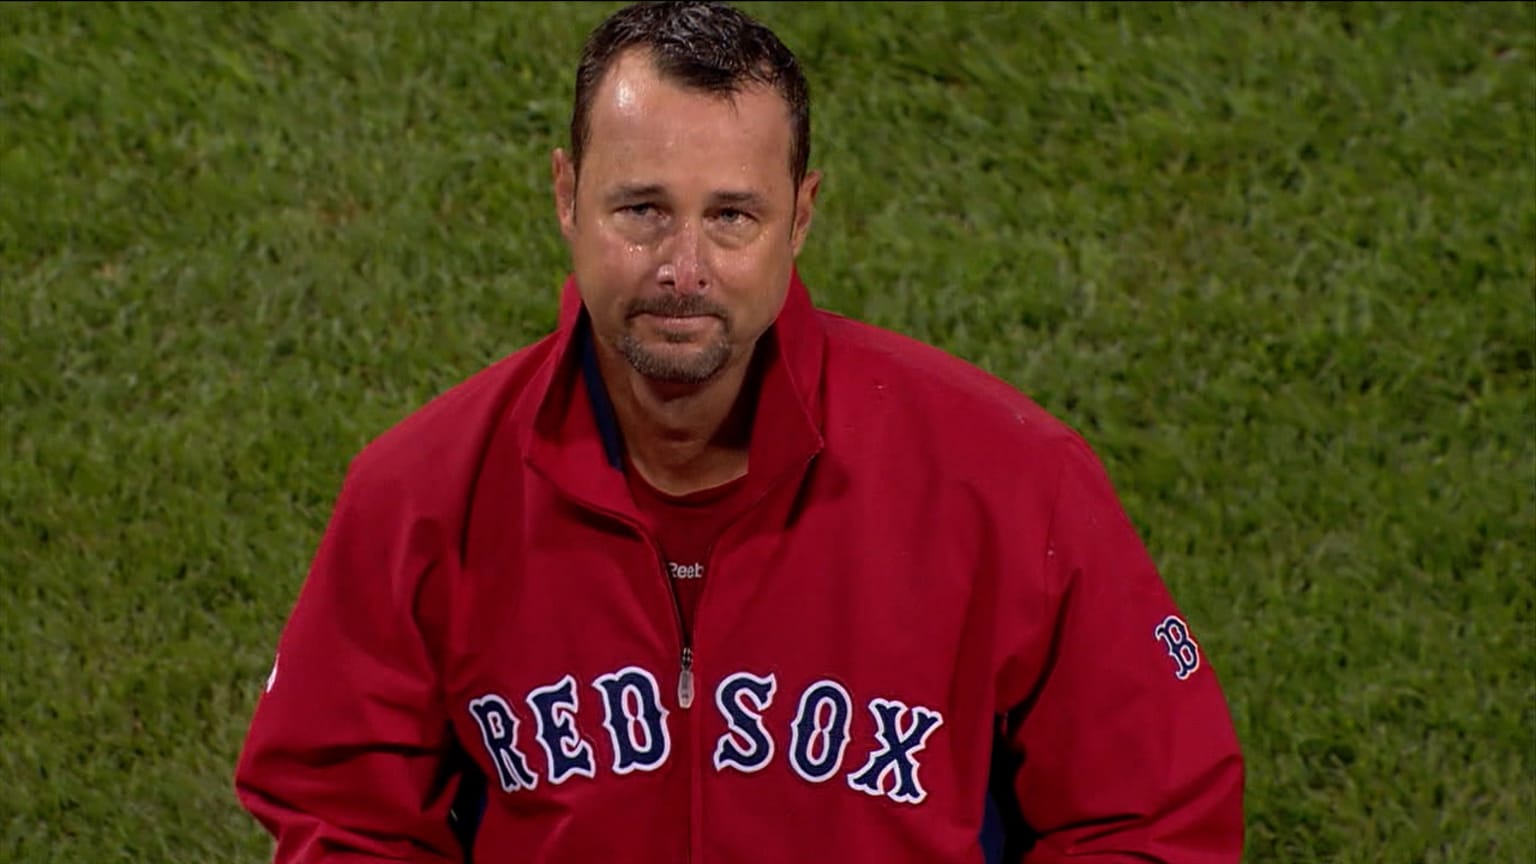 Tim Wakefield And Kevin Millar Have A Television Show - Over the